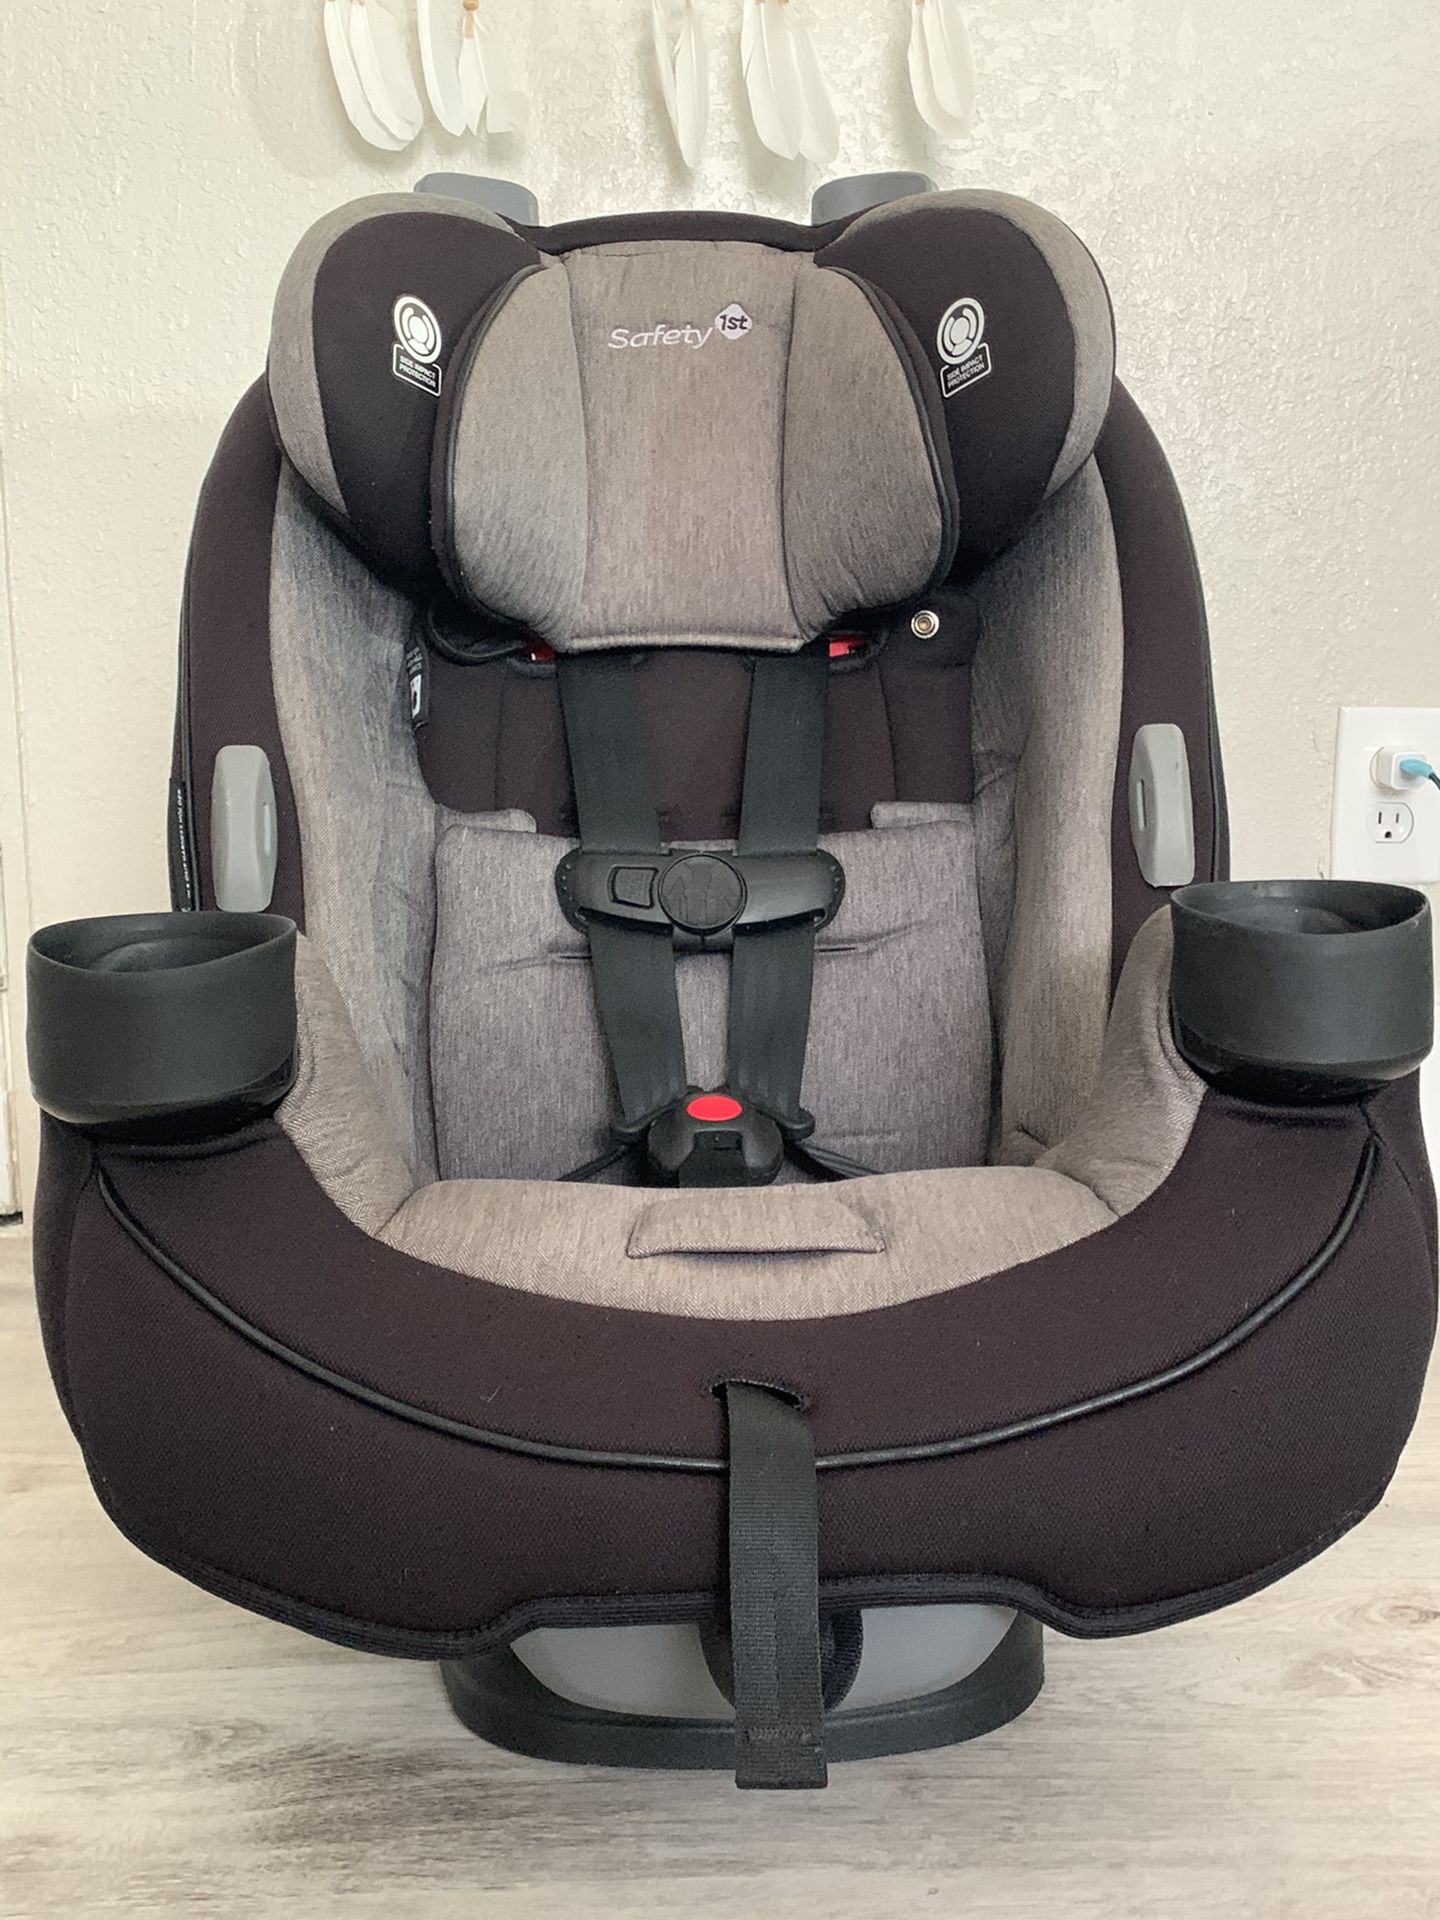 Safety 1st Grow and Go Convertible car seat